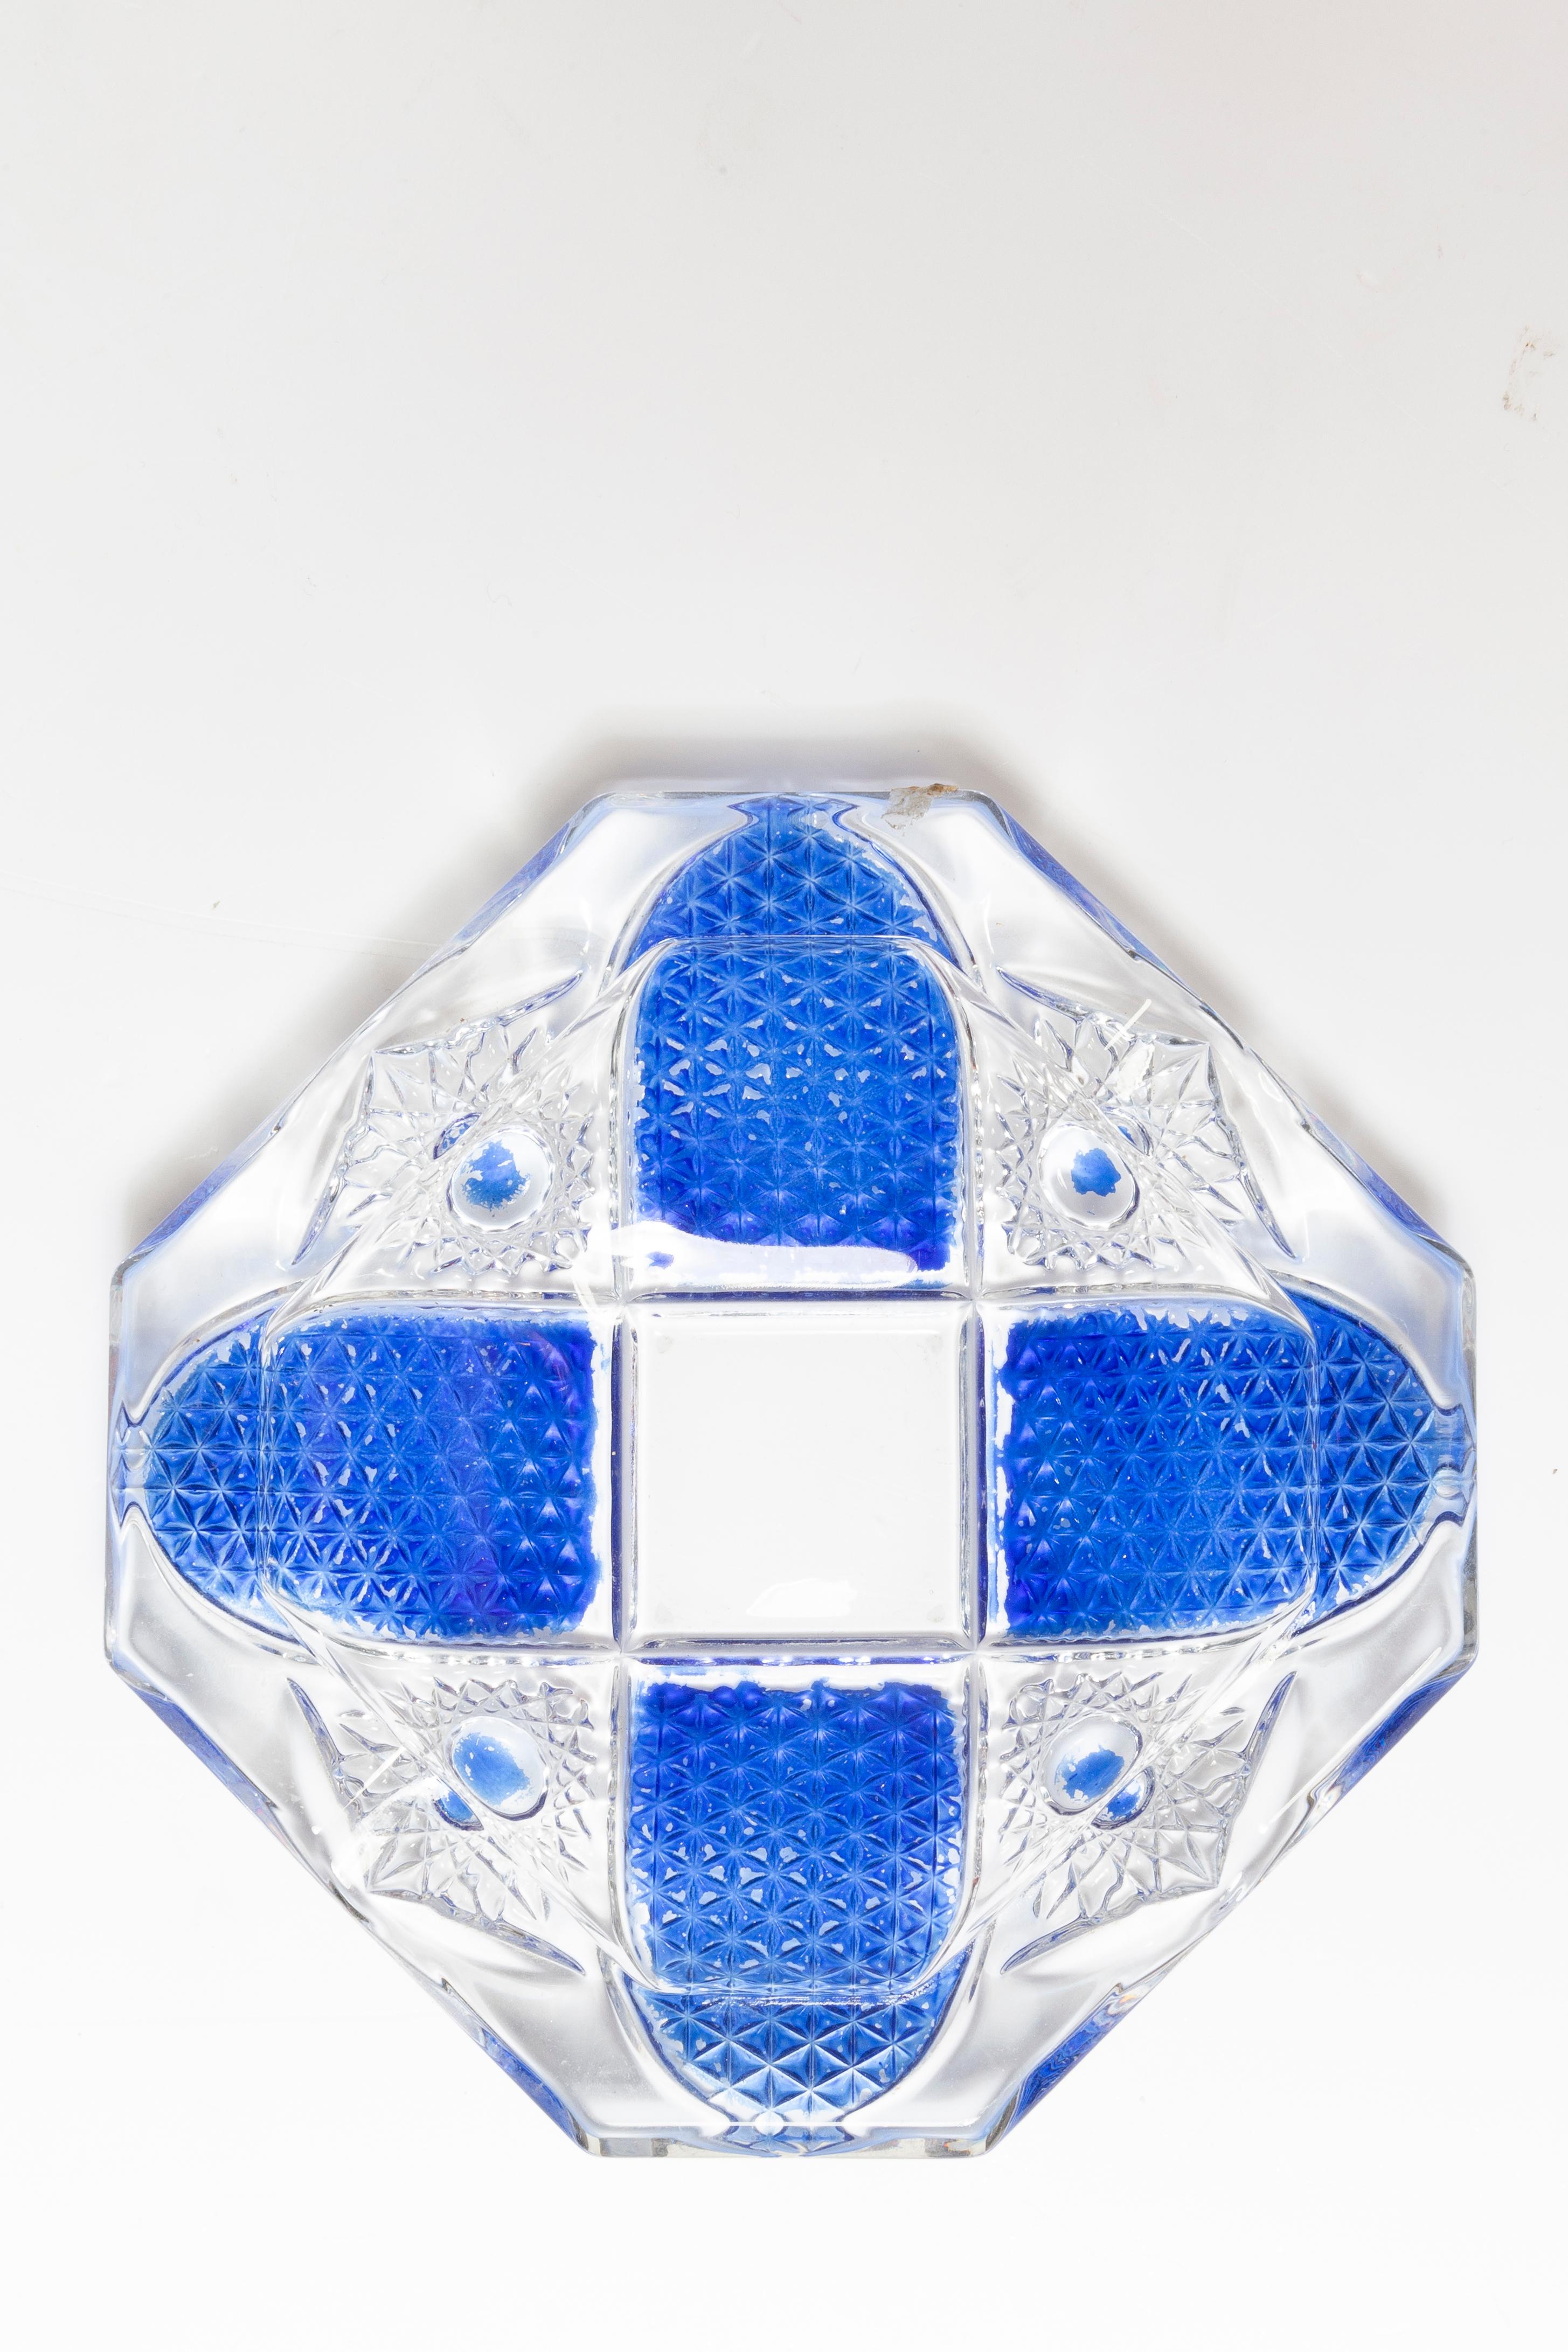 Italian Mid Century Blue and Transparent Glass Bowl Ashtray Element, Italy, 1970s For Sale